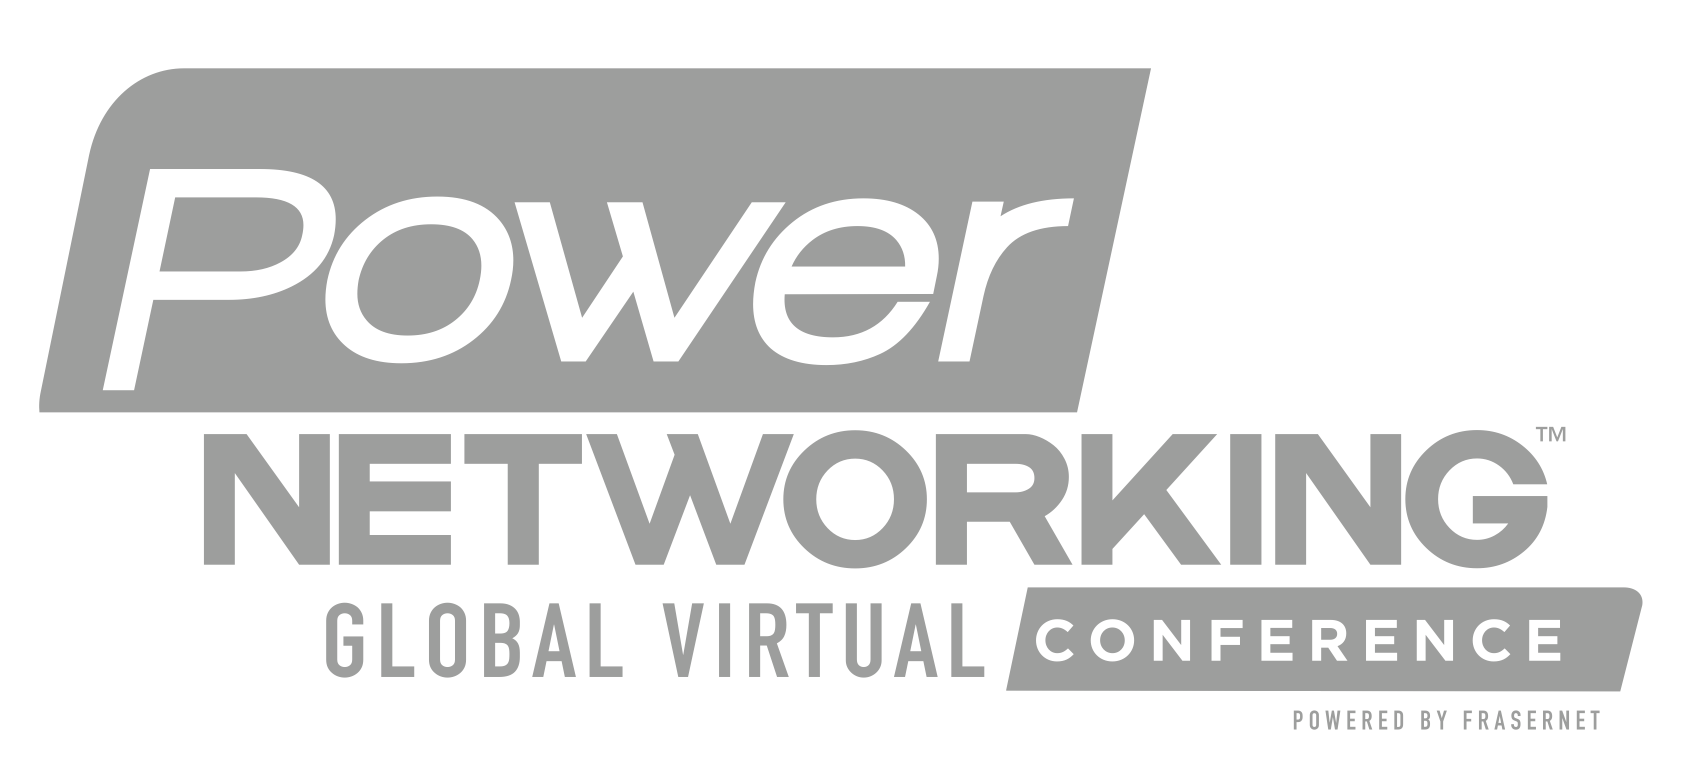 Power Networking Conference Black and White Logo